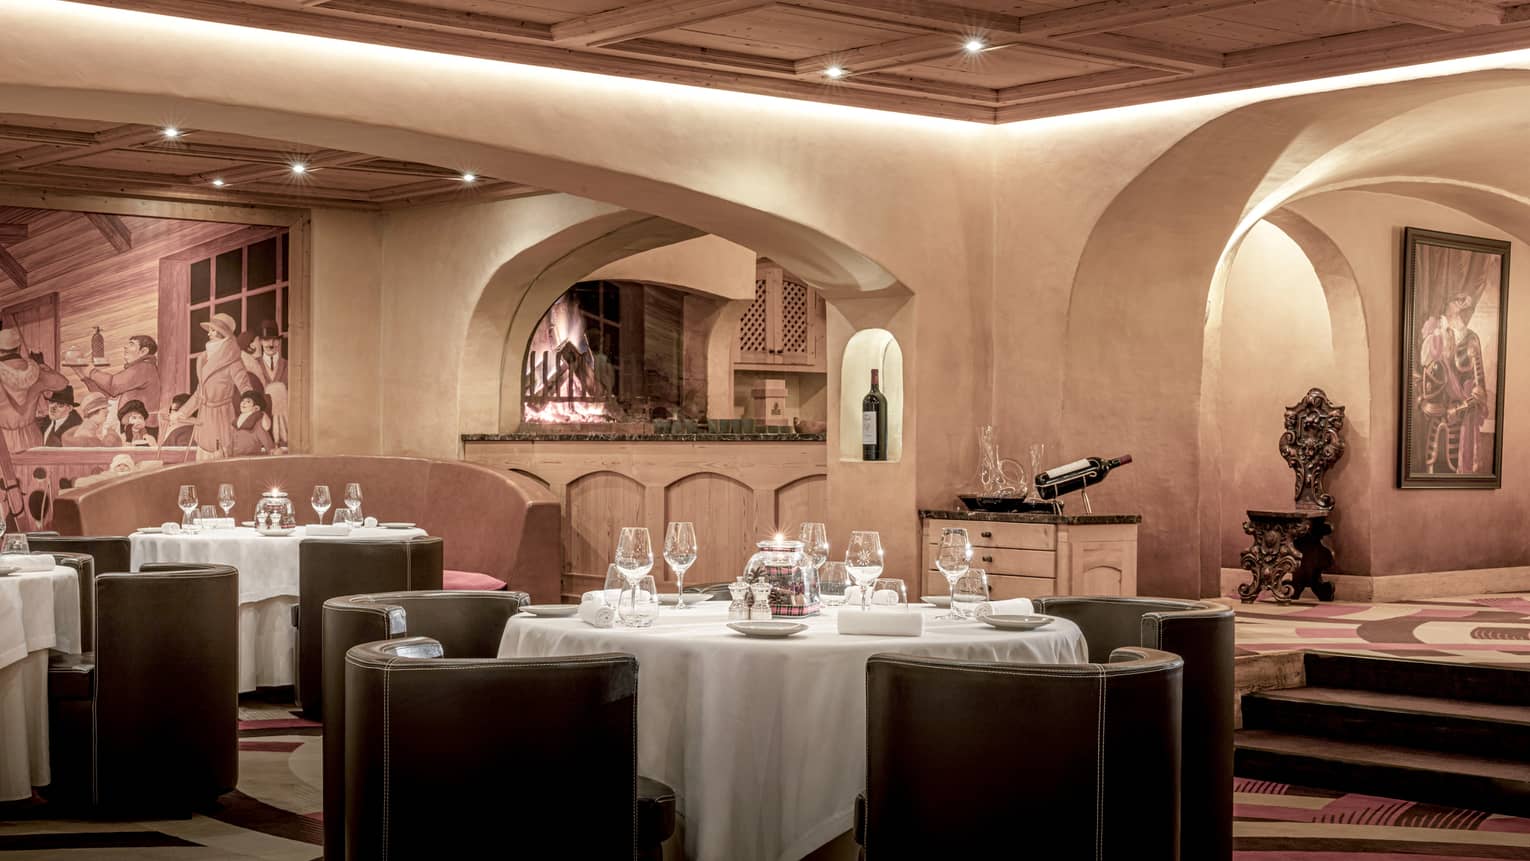 Restaurant with round set tables, rounded chairs, tan walls, mood lighting archways